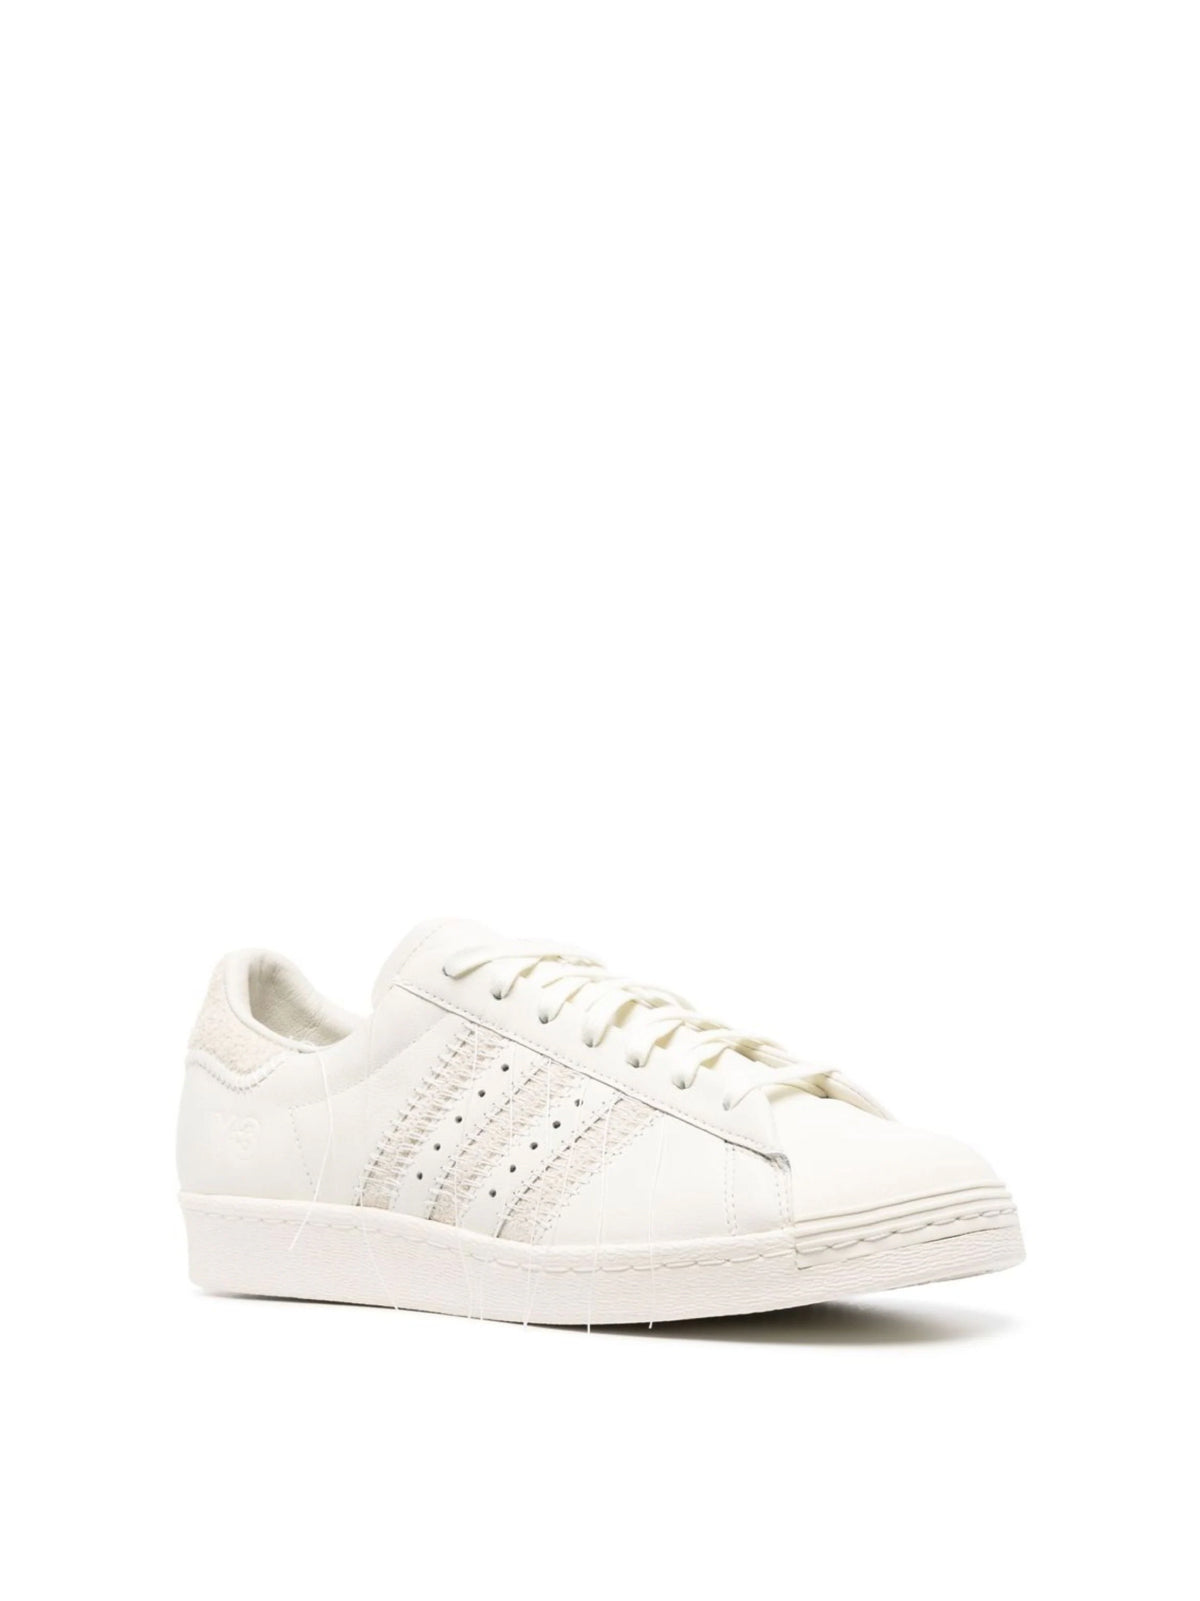 Y-3-OUTLET-SALE-Superstar Loose-Thread Off White Sneakers-ARCHIVIST